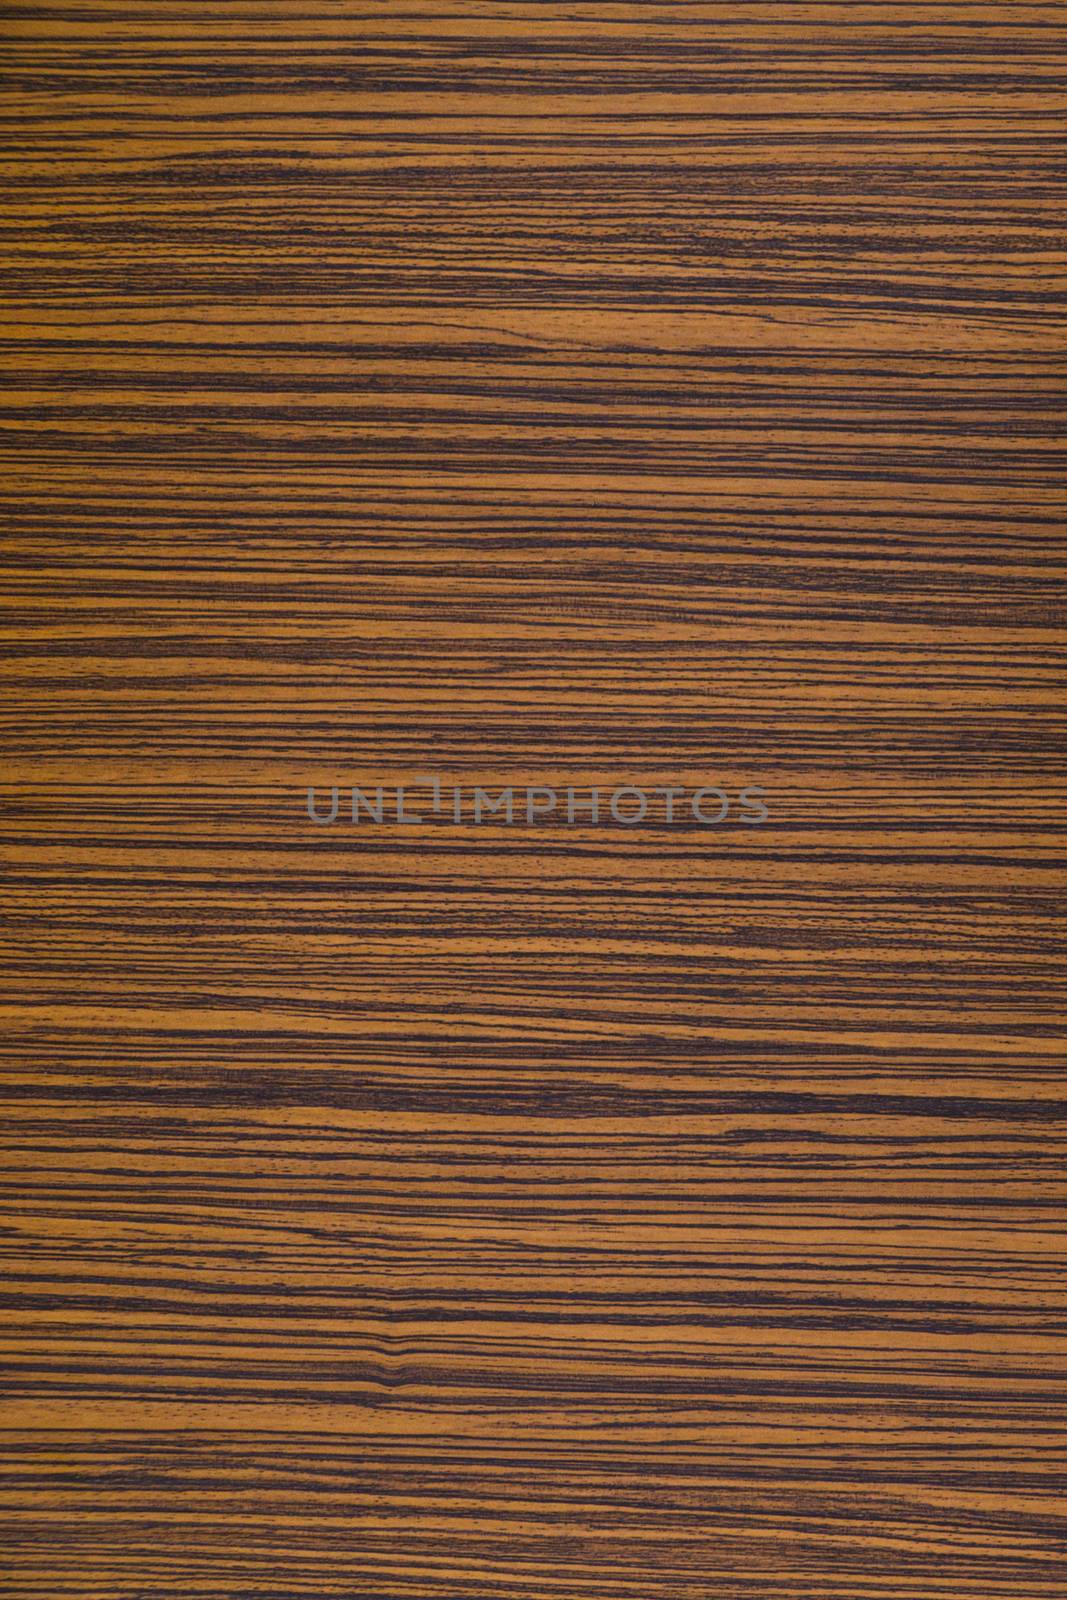 Zebrawood design of brown and black striped color on a laminated table top. by sonandonures